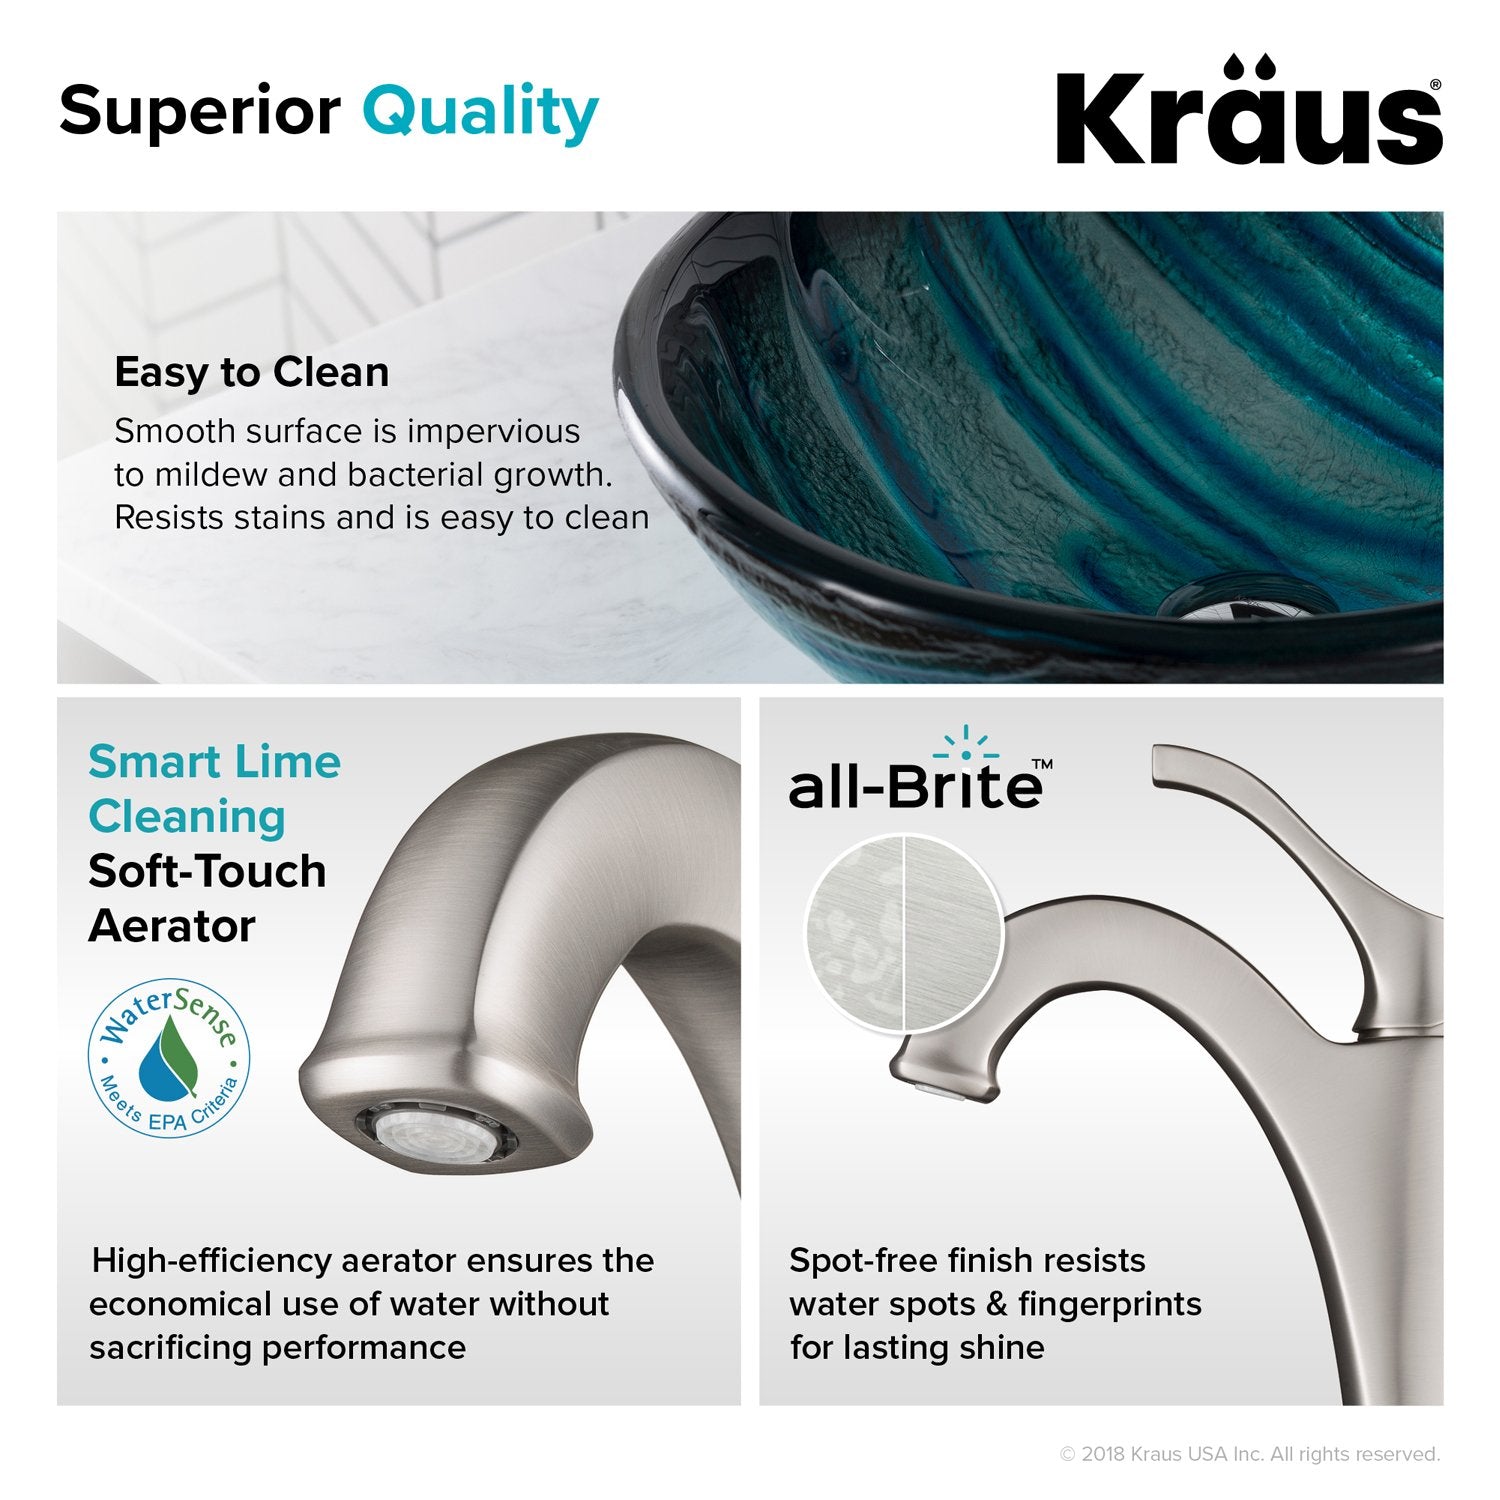 KRAUS 17-Inch Blue Glass Nature Series Bathroom Vessel Sink and Arlo Faucet  Combo Set with Pop-Up Drain